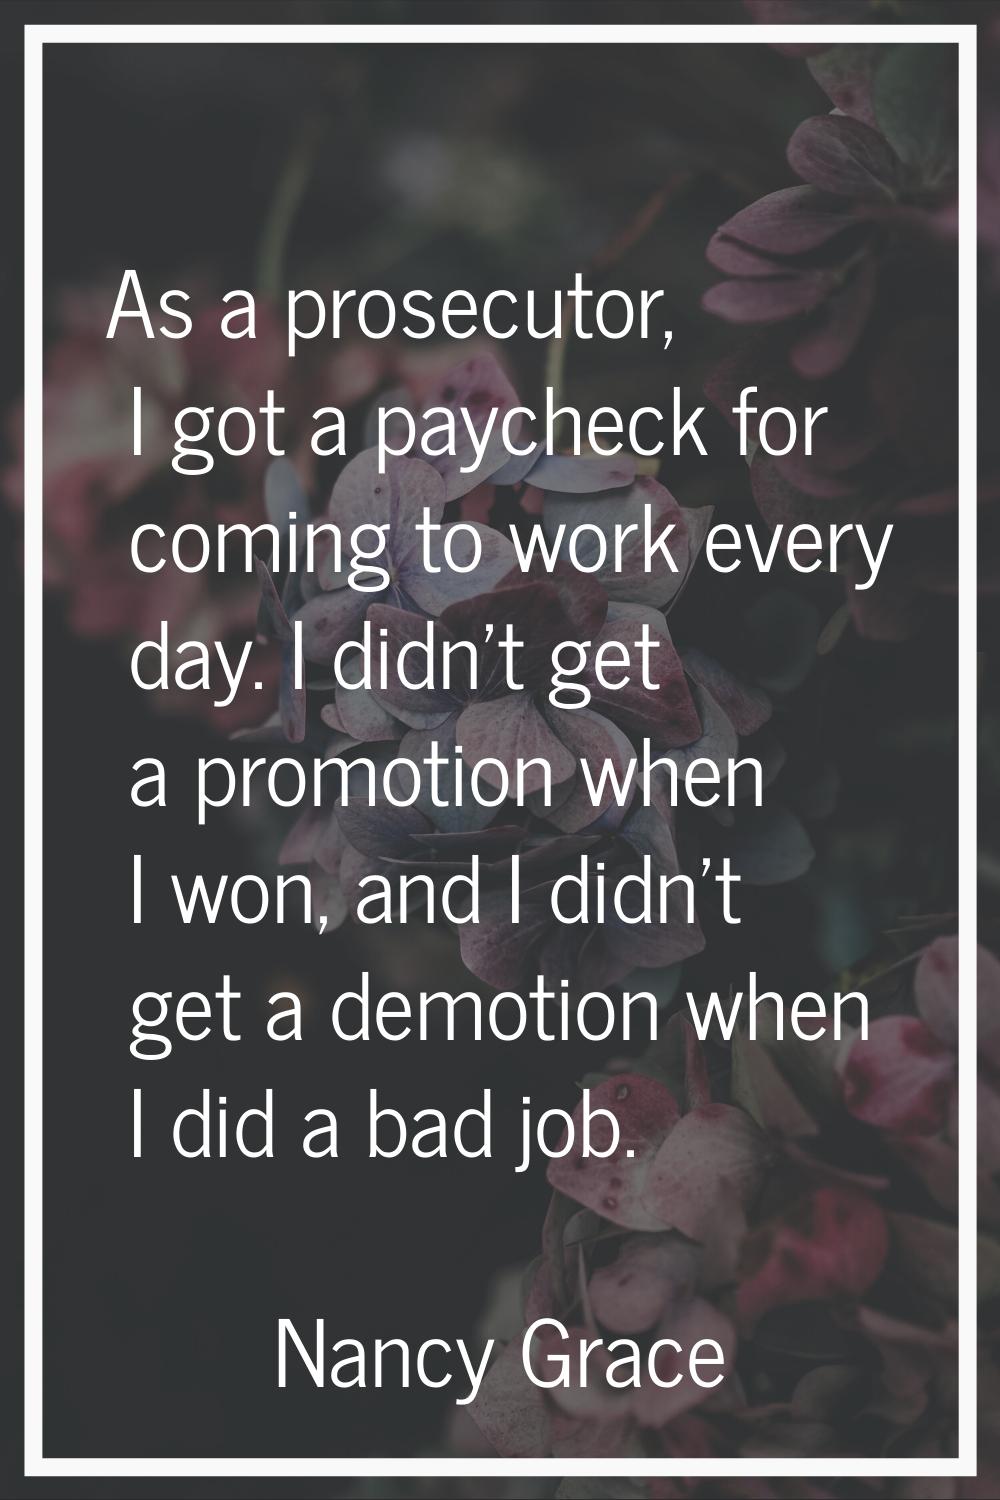 As a prosecutor, I got a paycheck for coming to work every day. I didn't get a promotion when I won